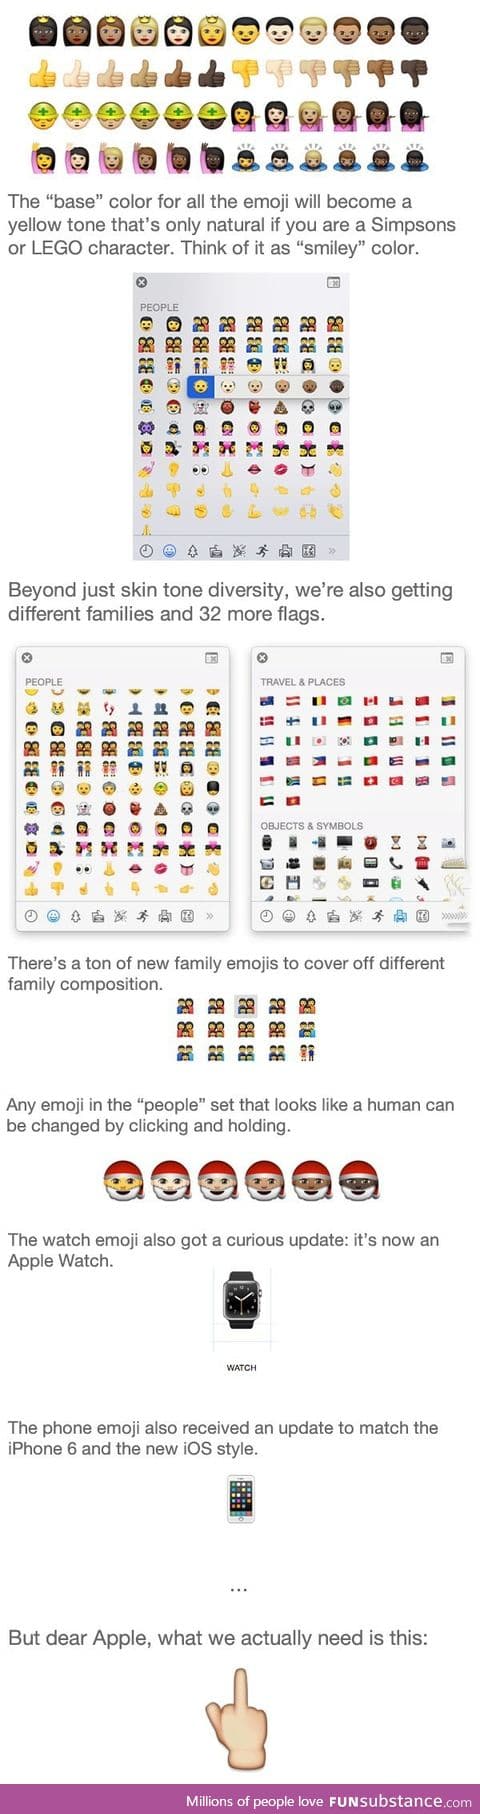 These are Apple's new, diverse emoji!